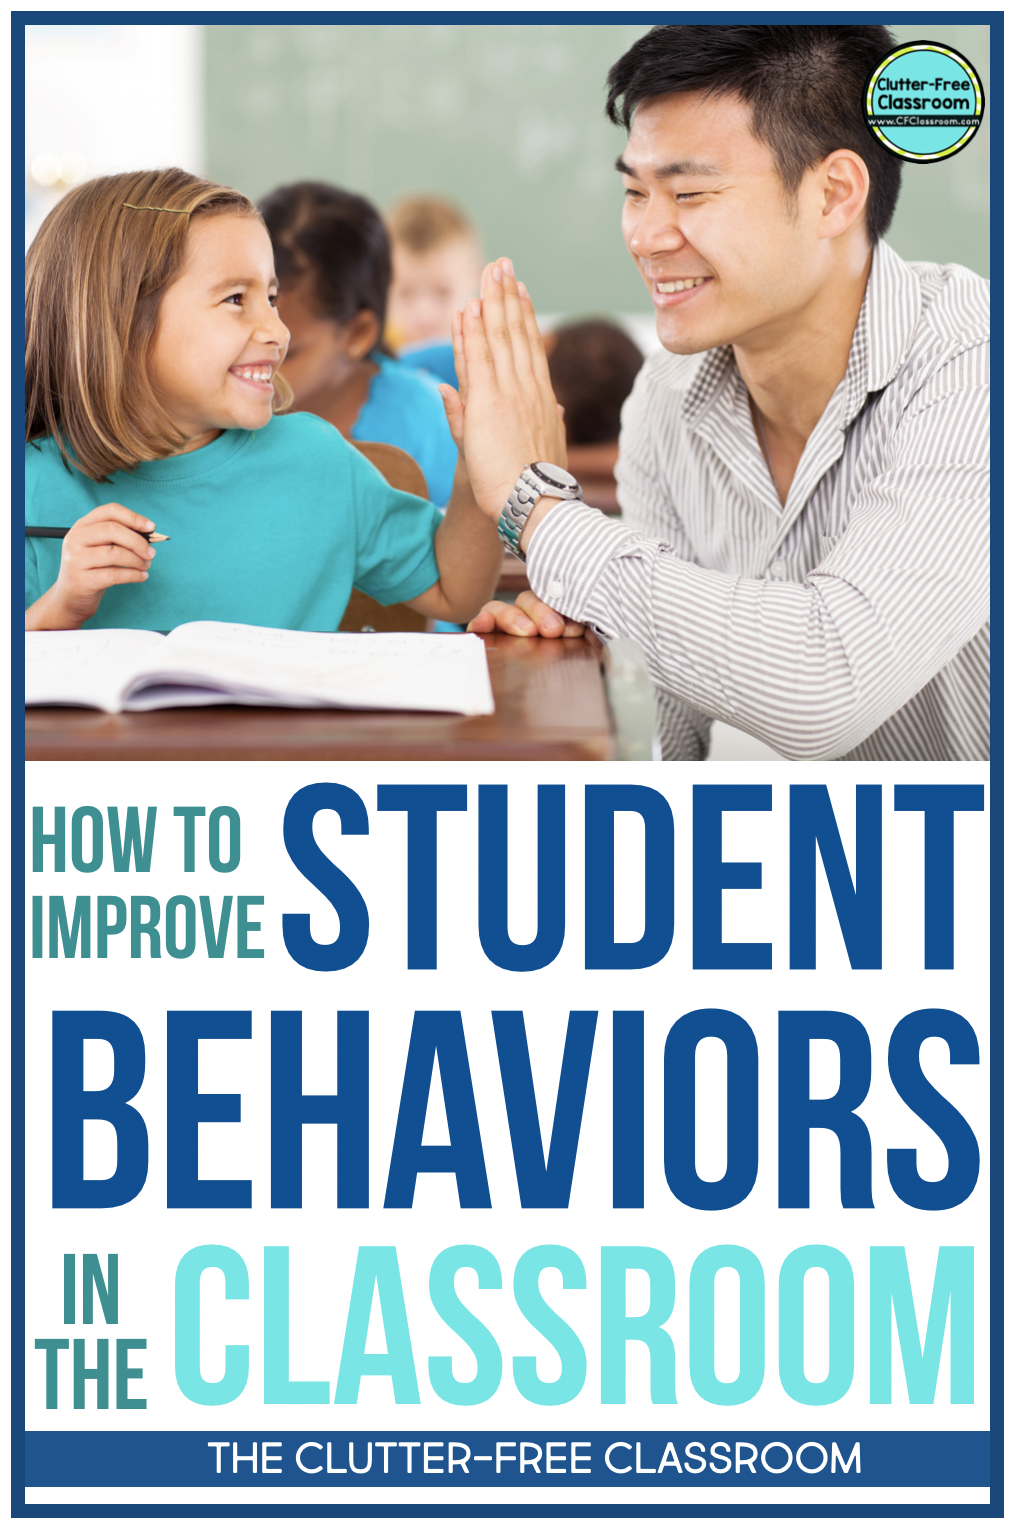 Are you looking for ways to improve positive student behavior and easily communicate with parents daily? Check out these behavior management and parent communication ideas from the Clutter Free Classroom including behavior plans, logs, charts, notes, forms, apps, sheets, tools, websites, and posts.